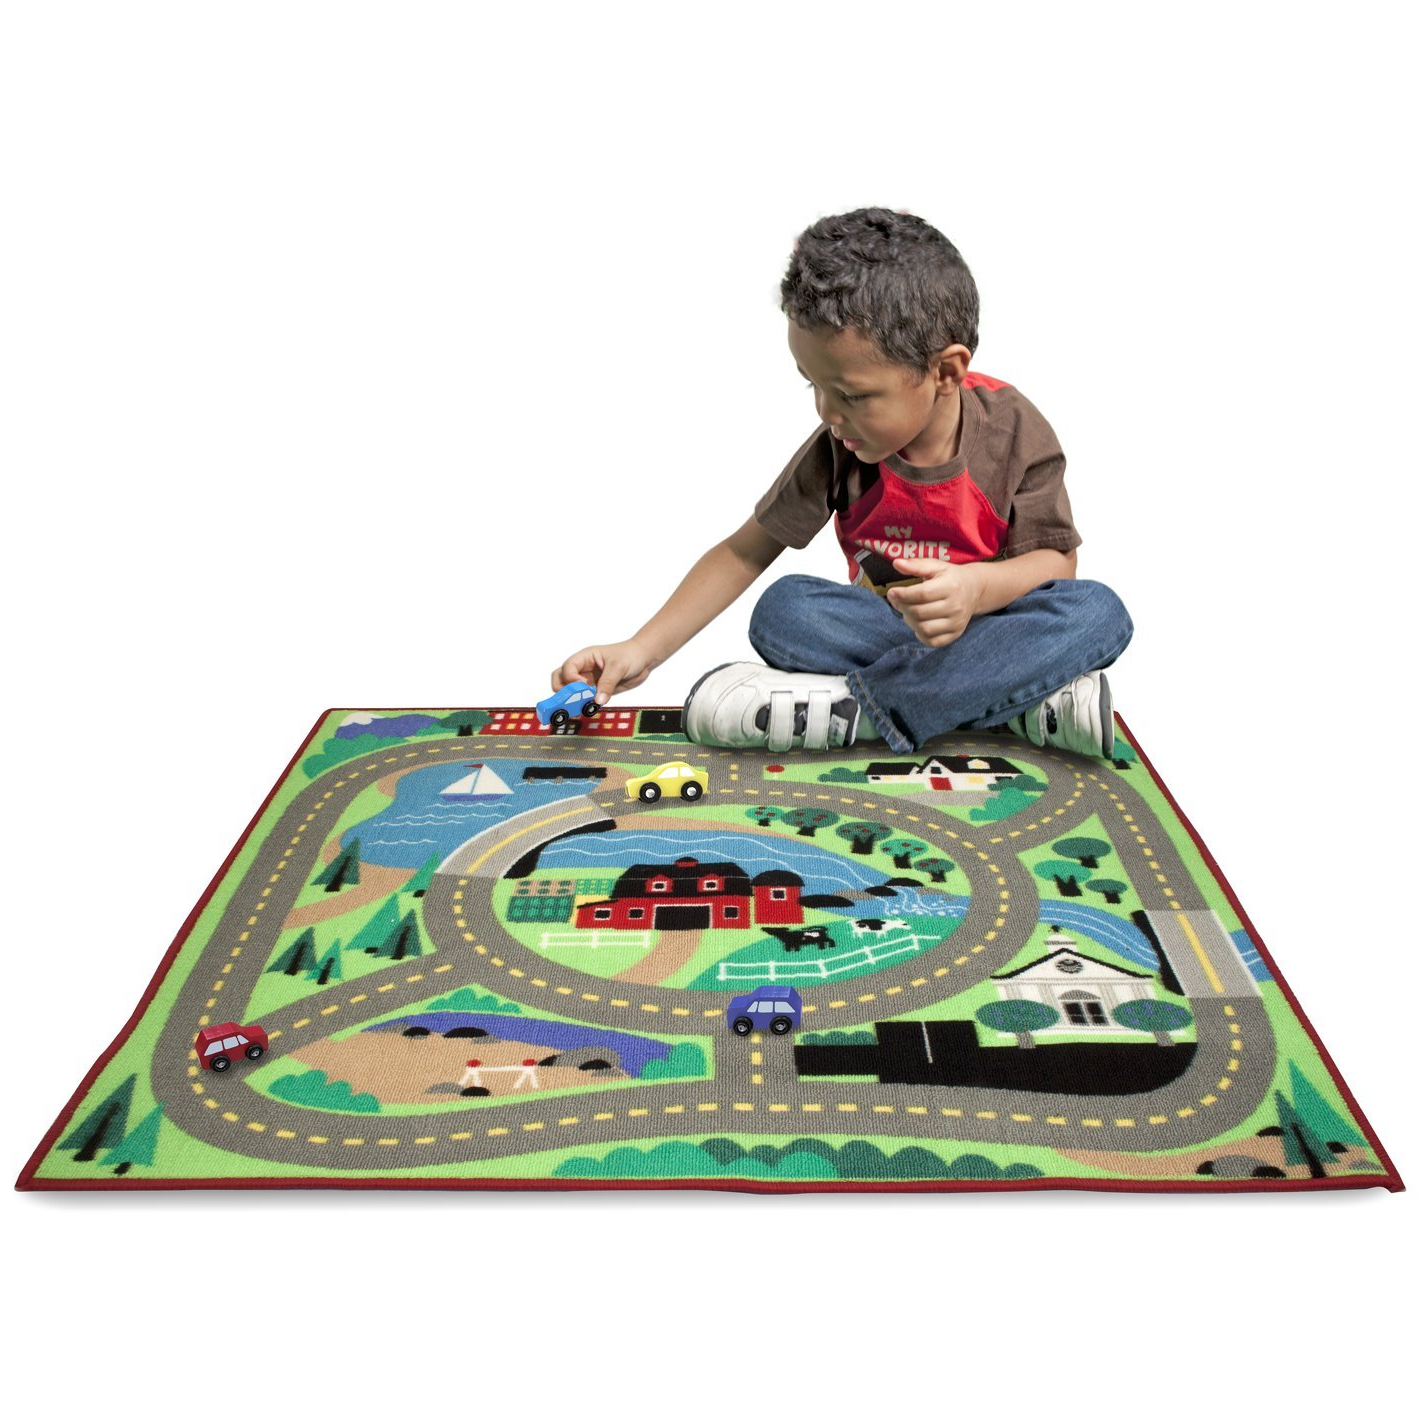 Melissa & Doug Round the Town Road Rug and Car Activity Play Set With 4 Wooden Cars Only $20.09 Shipped For Prime Members!